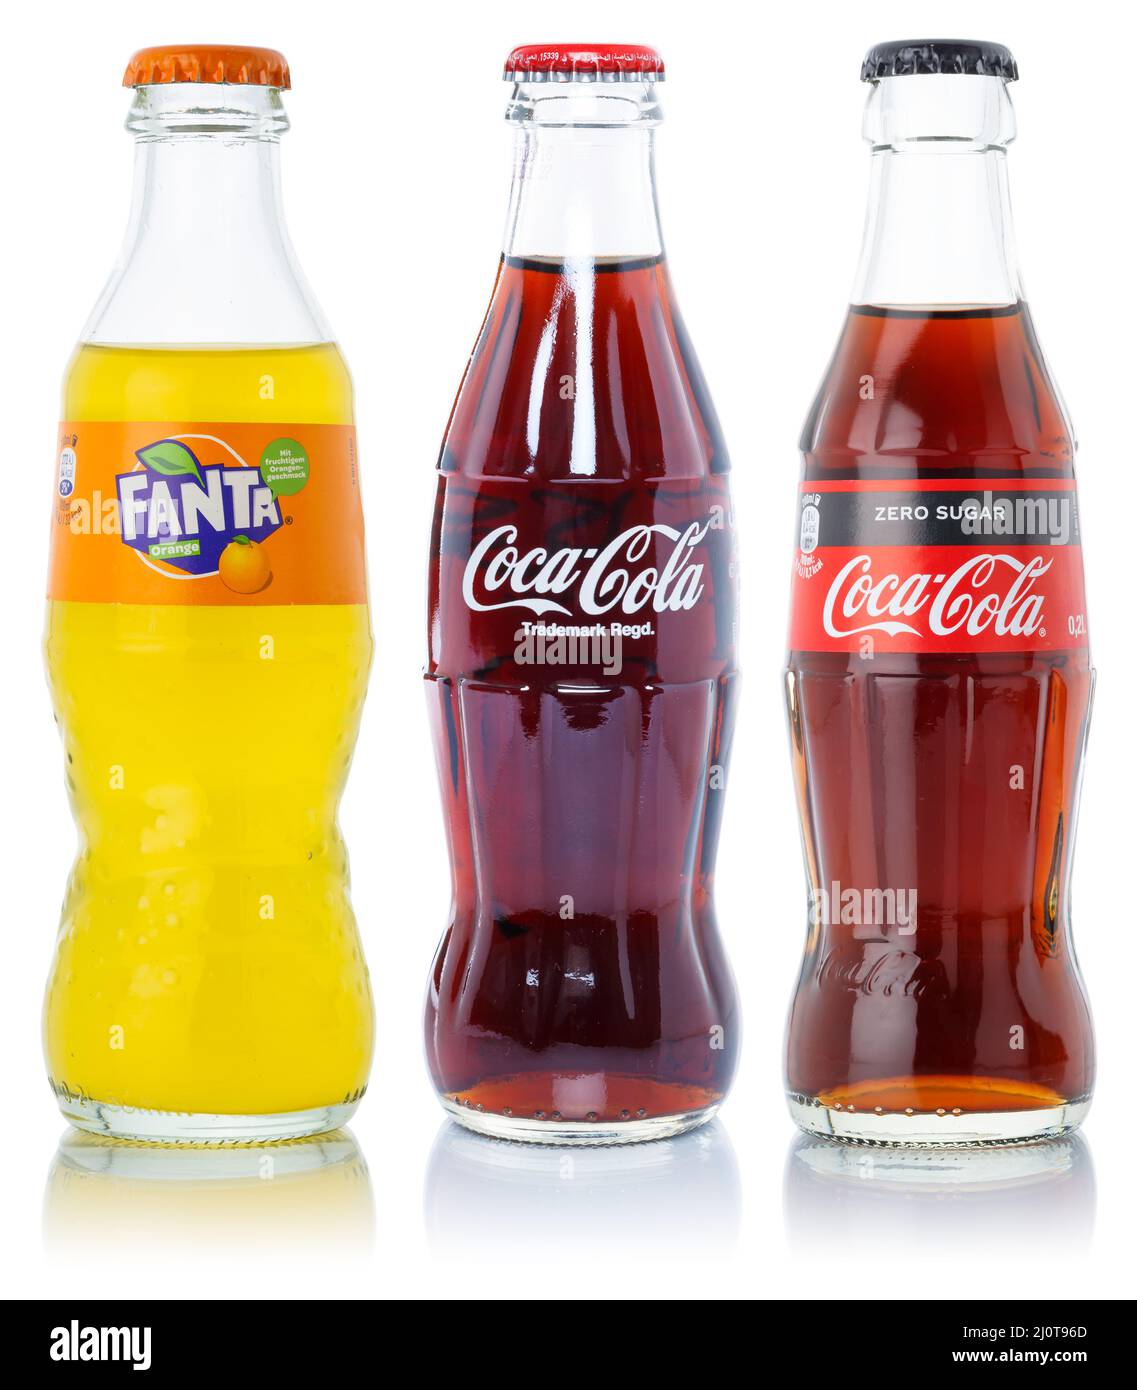 Fanta coca cola High Resolution Stock Photography and Images - Alamy